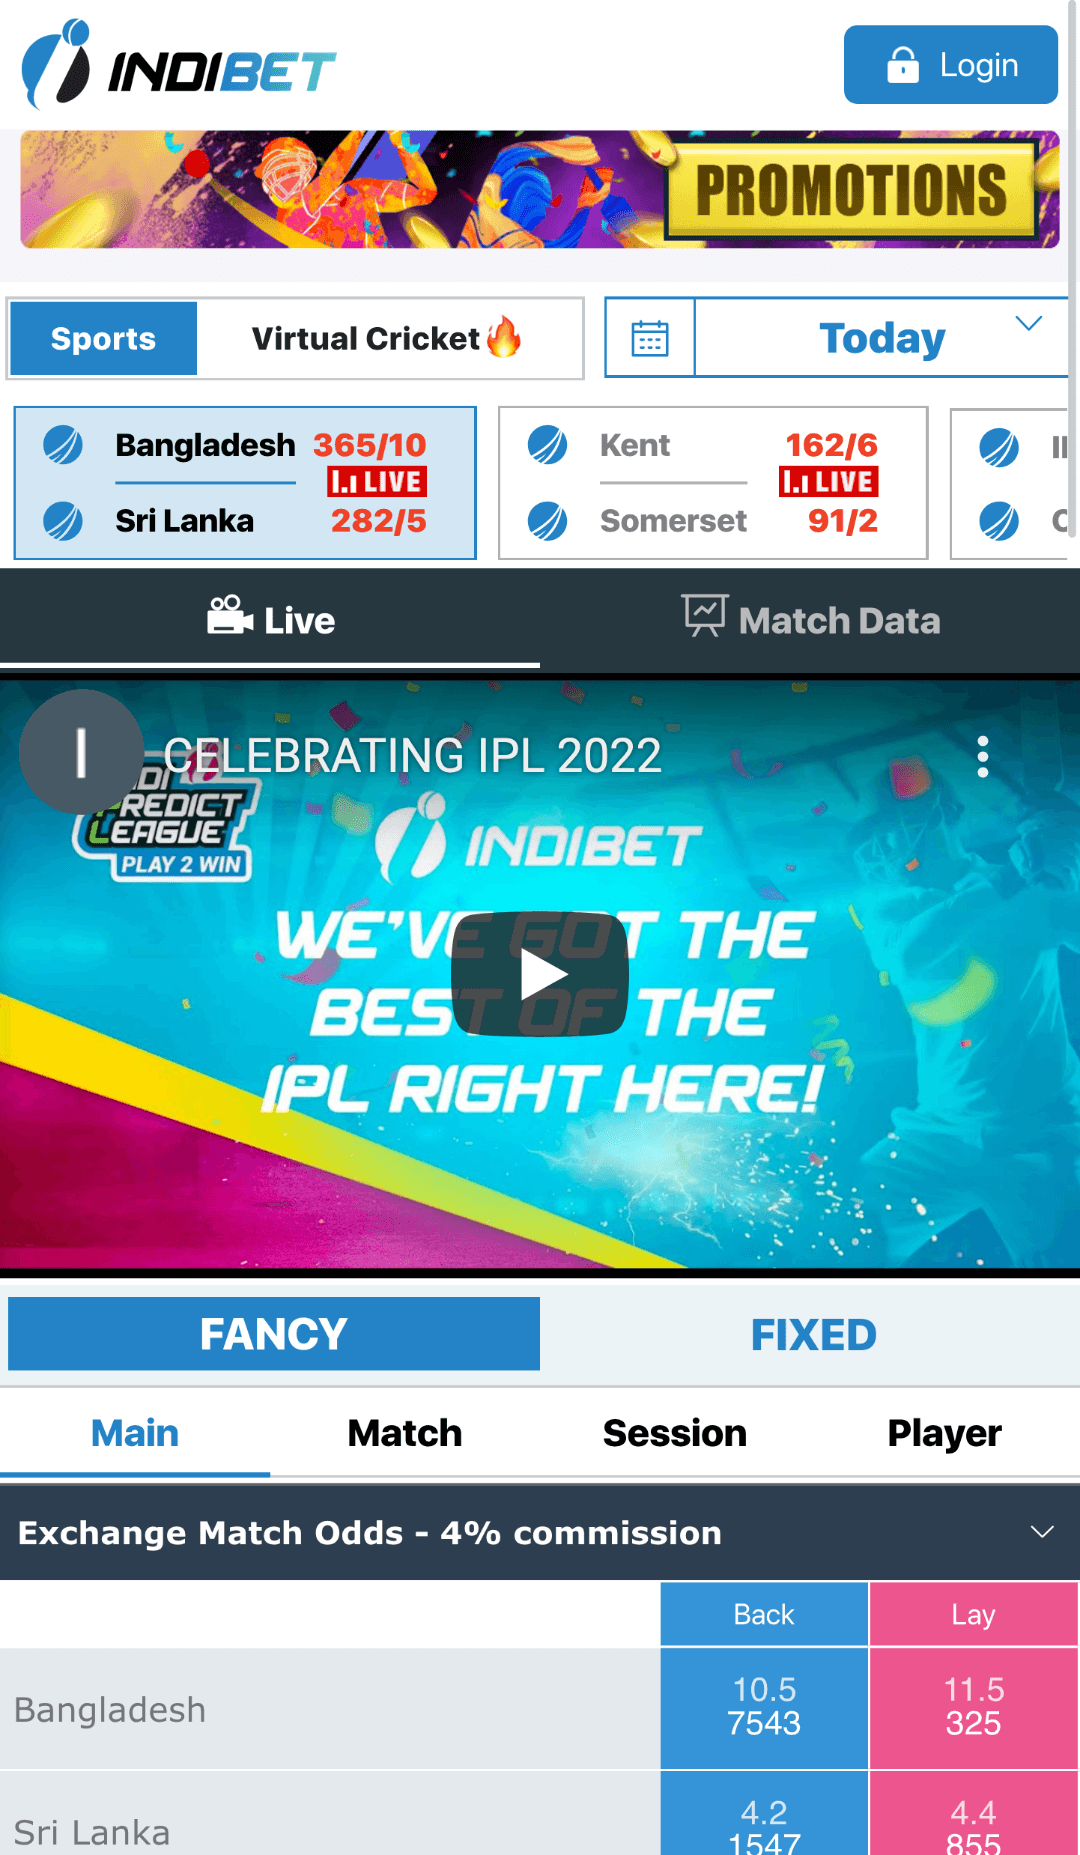 The main section of the Indibet mobile app